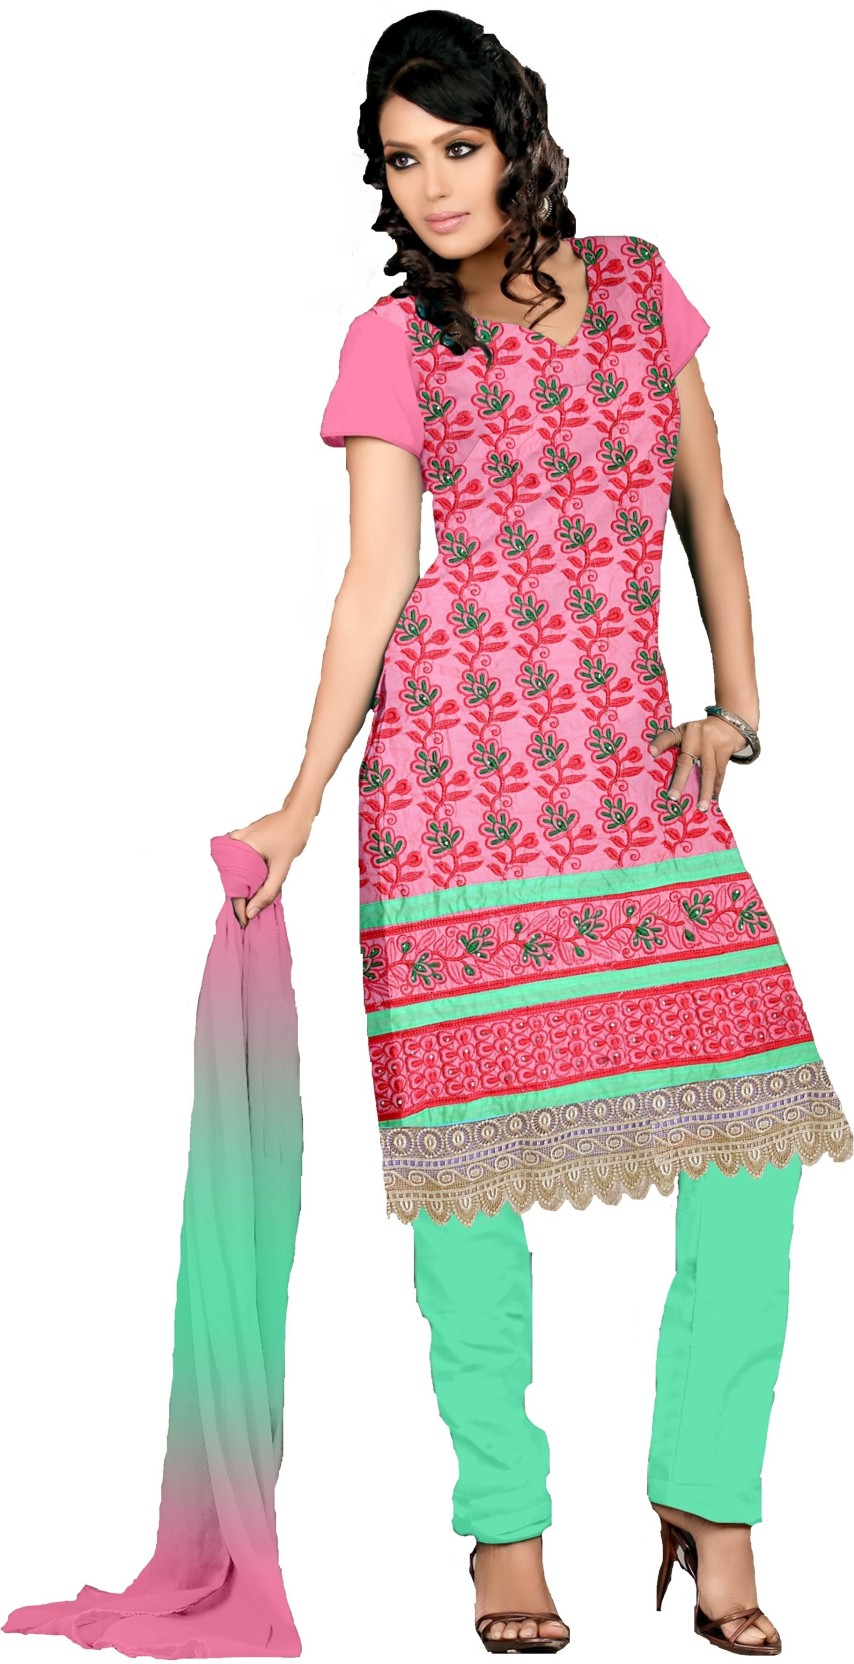 For india clothing t online couple in shirts shopping